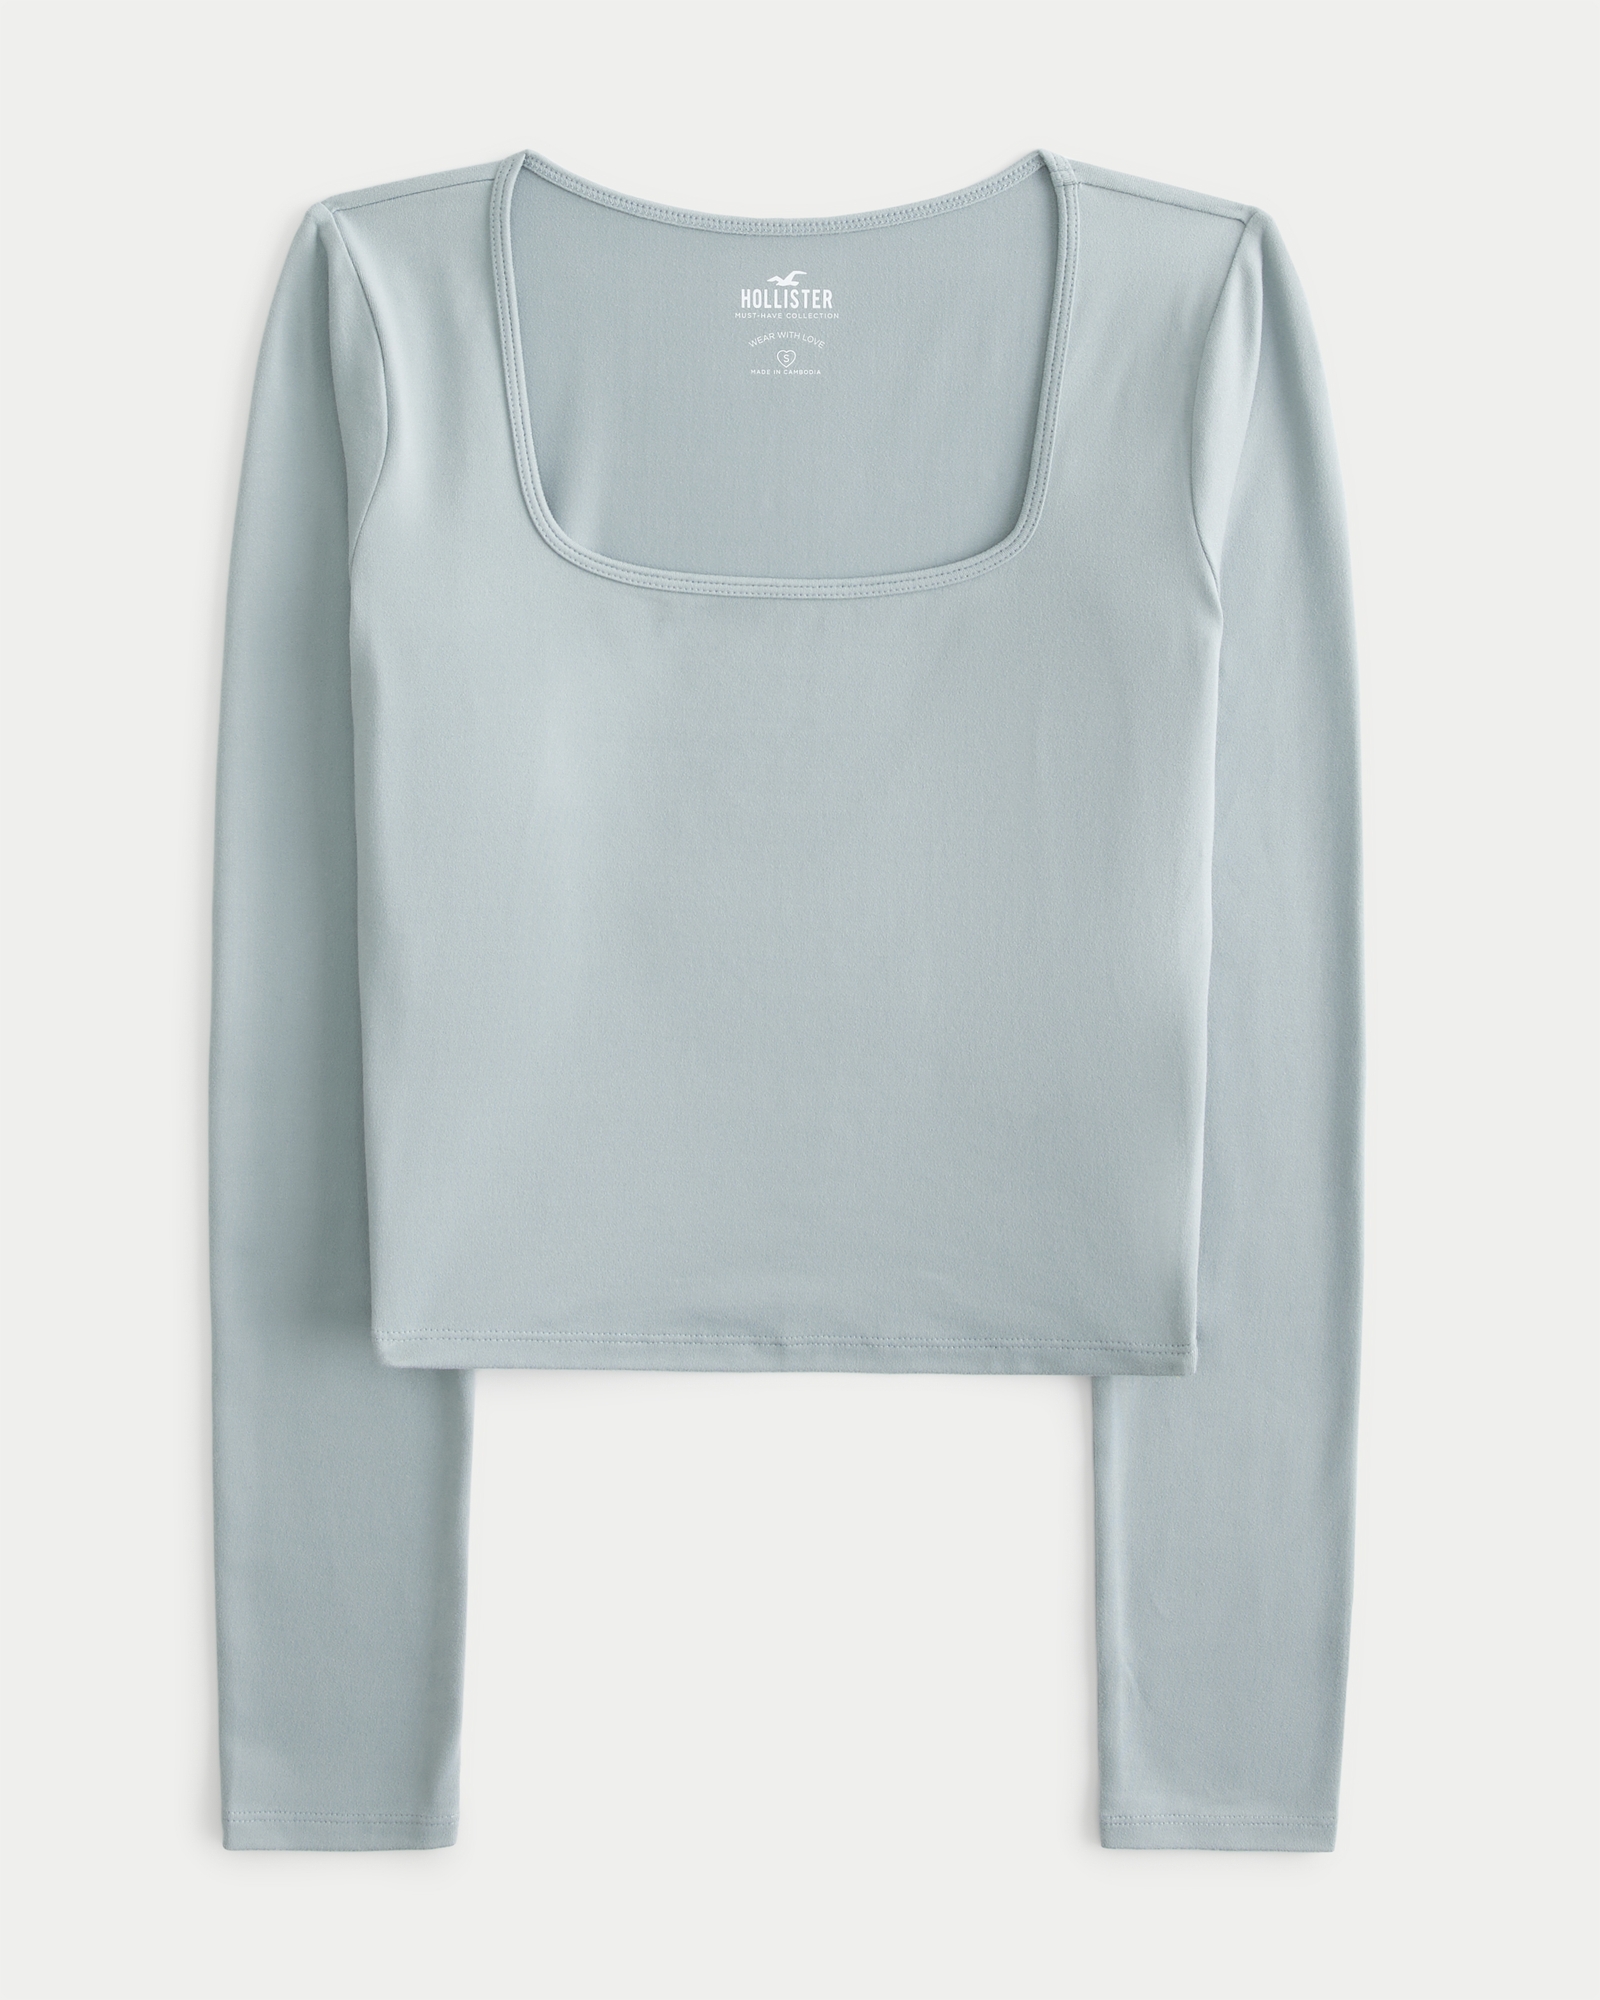 Shop Hollister Long Sleeve T-shirts for Women up to 40% Off